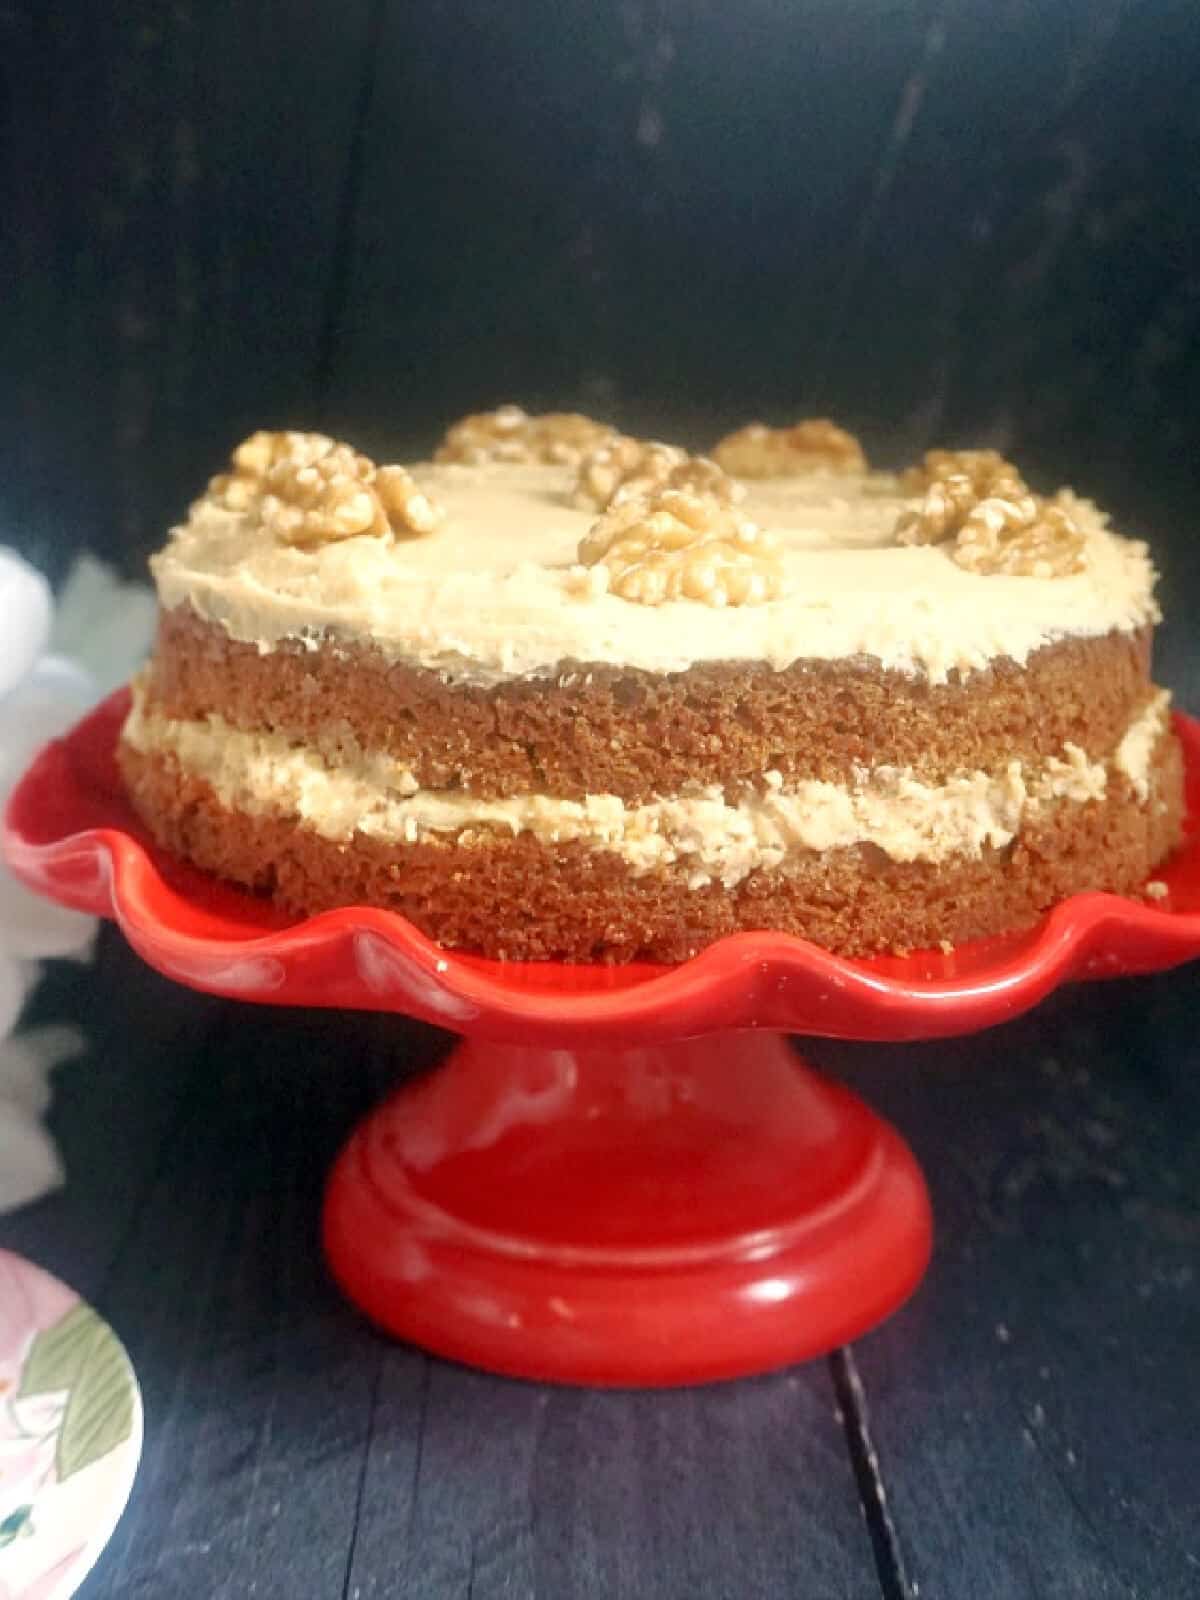 A coffee cake on a red cake stand.